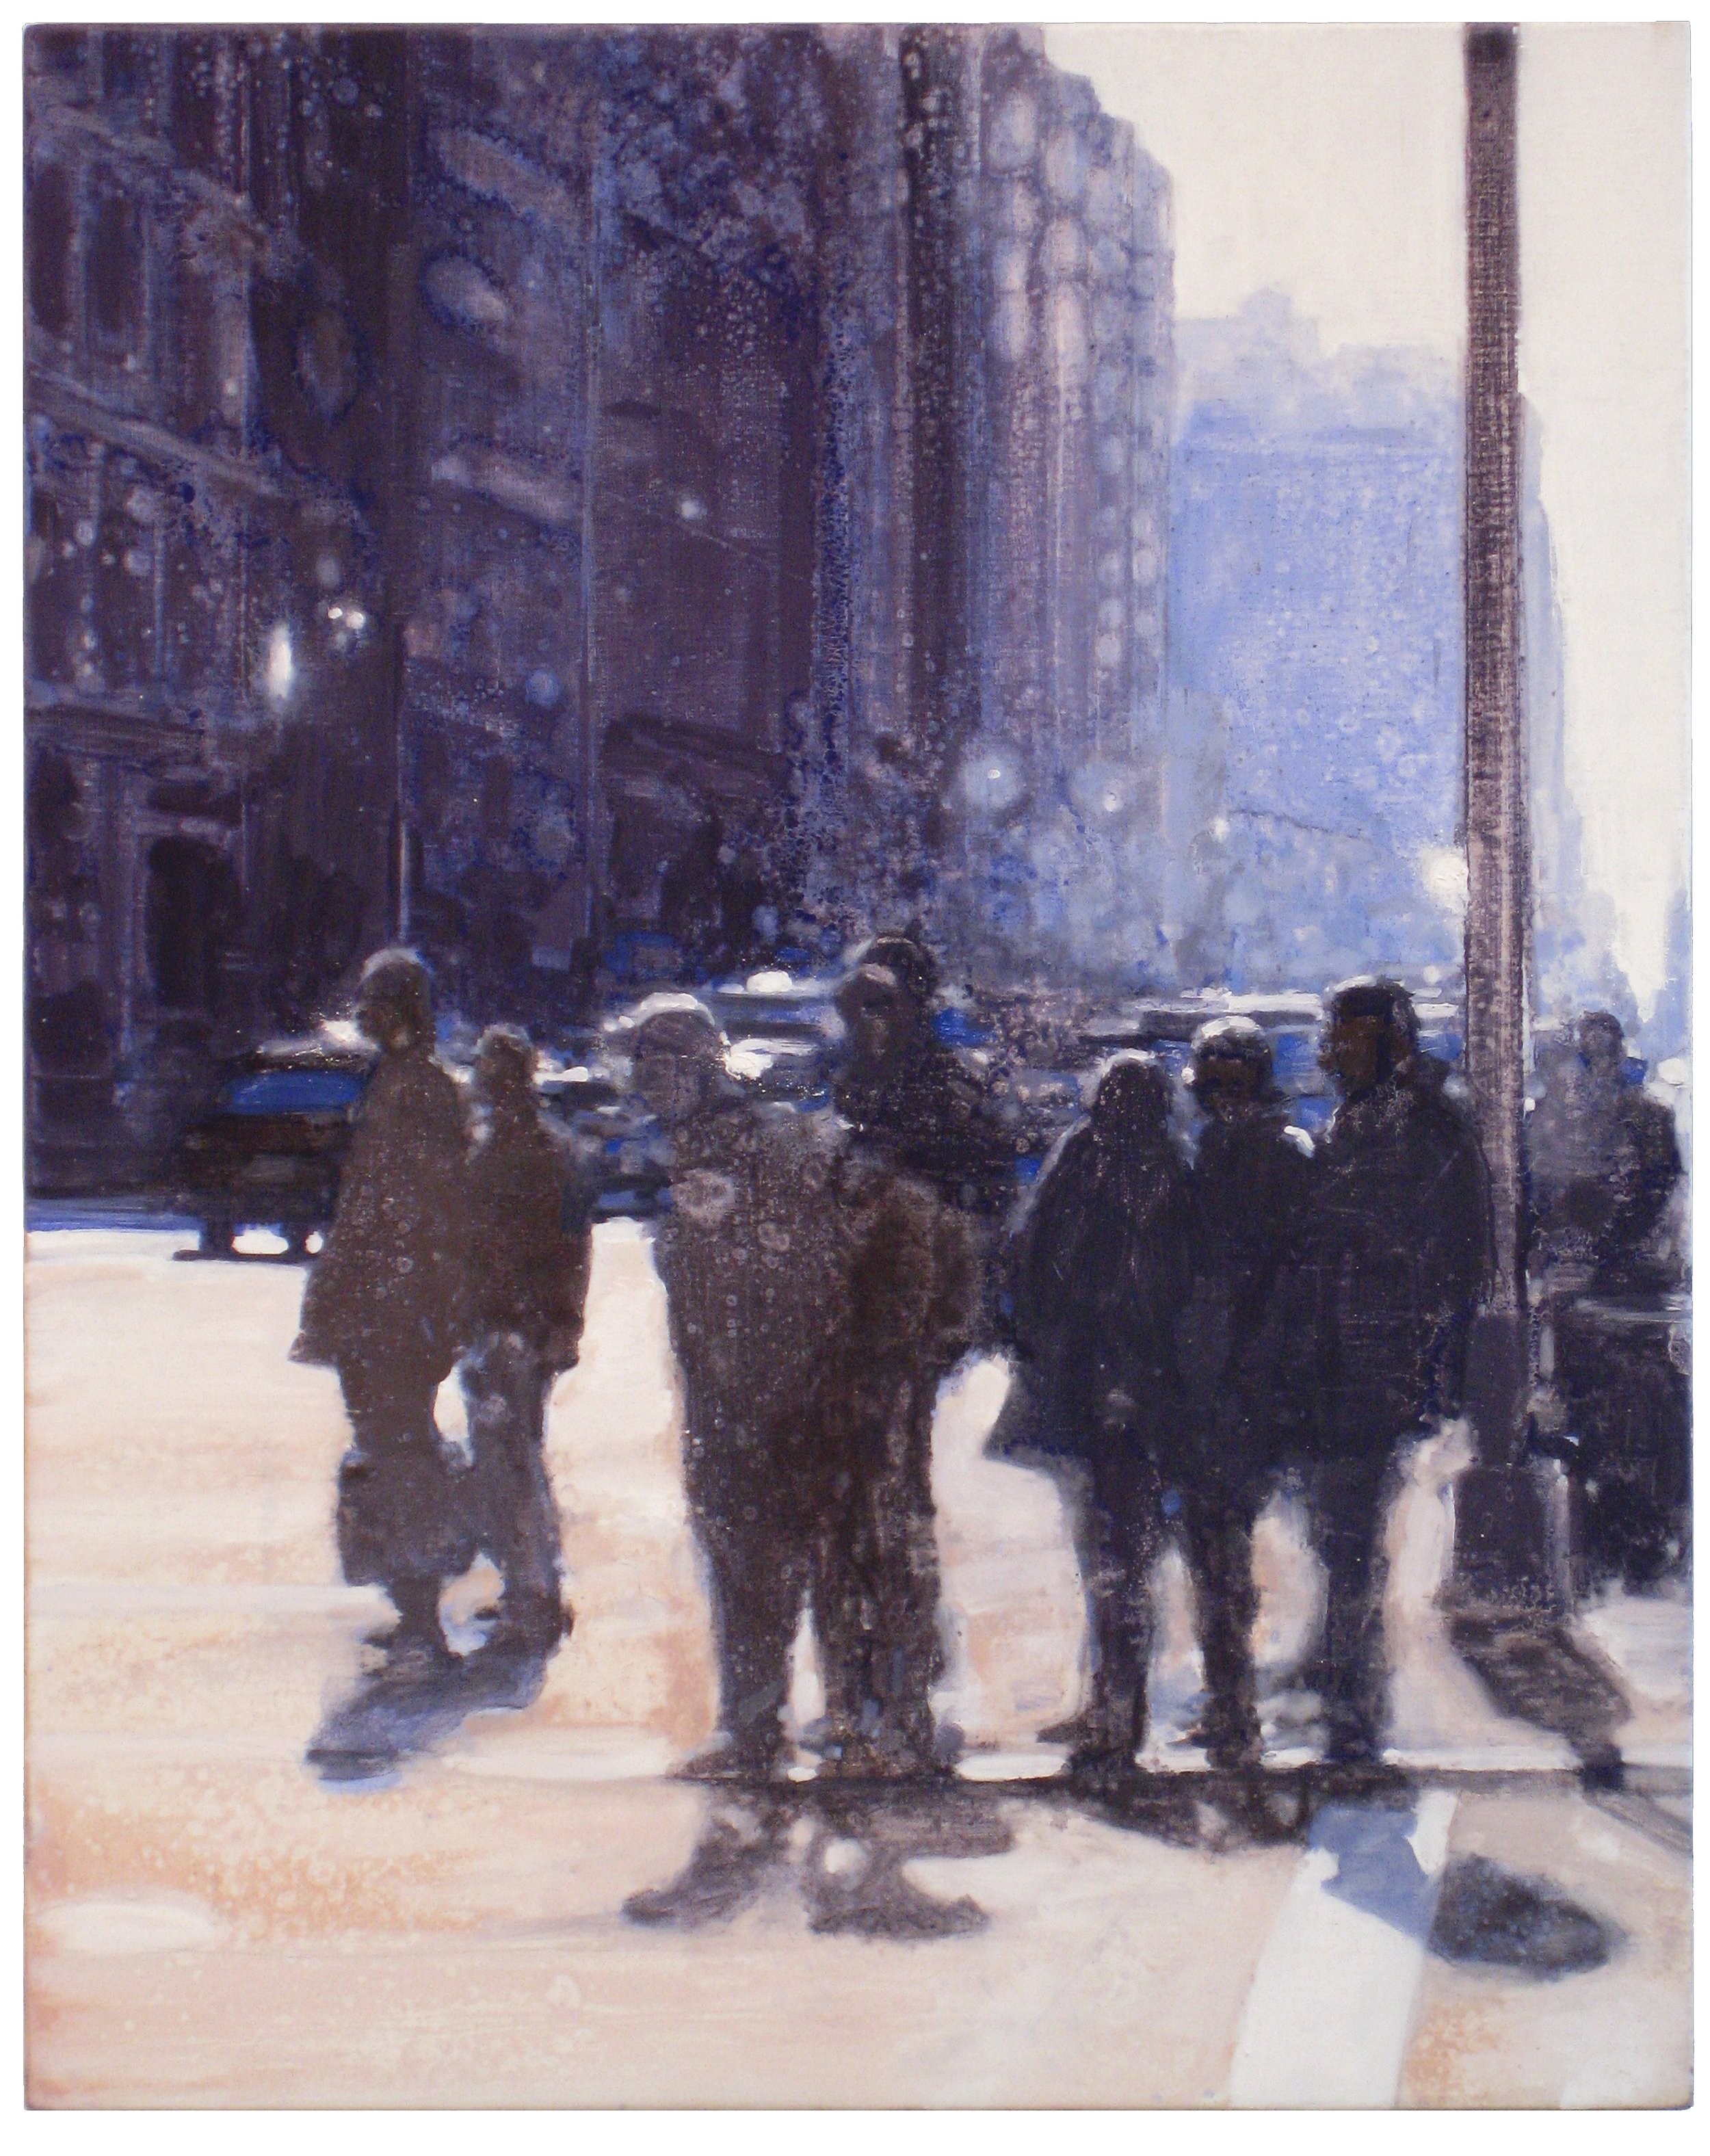  Crossing 5th Avenue 1 (study) 25x20 inches (63x51cm) Oil on linen 2008 